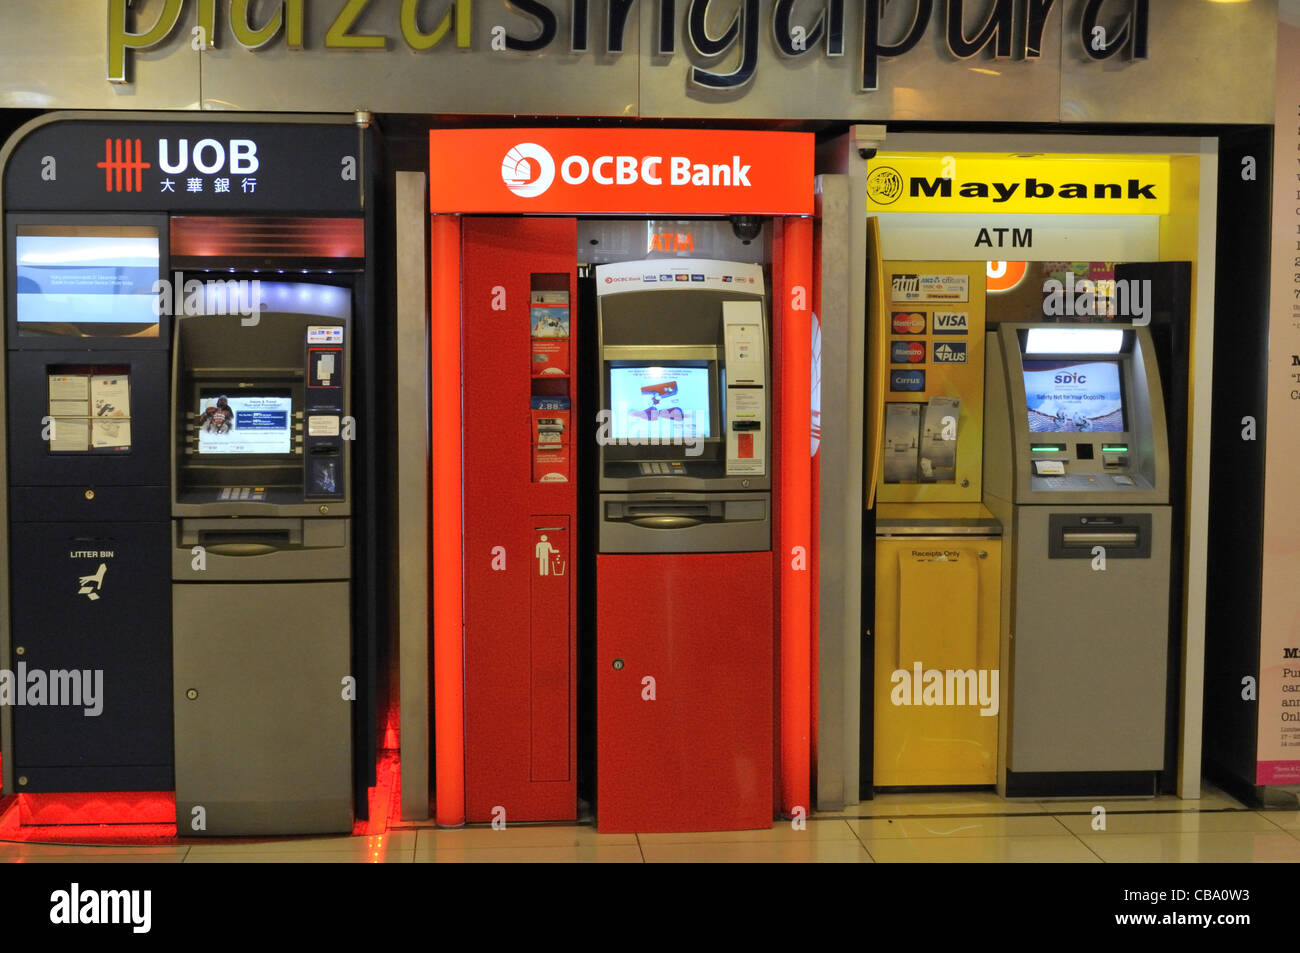 Atm in singapore - Bitcoin Exchange Singapore You can ...